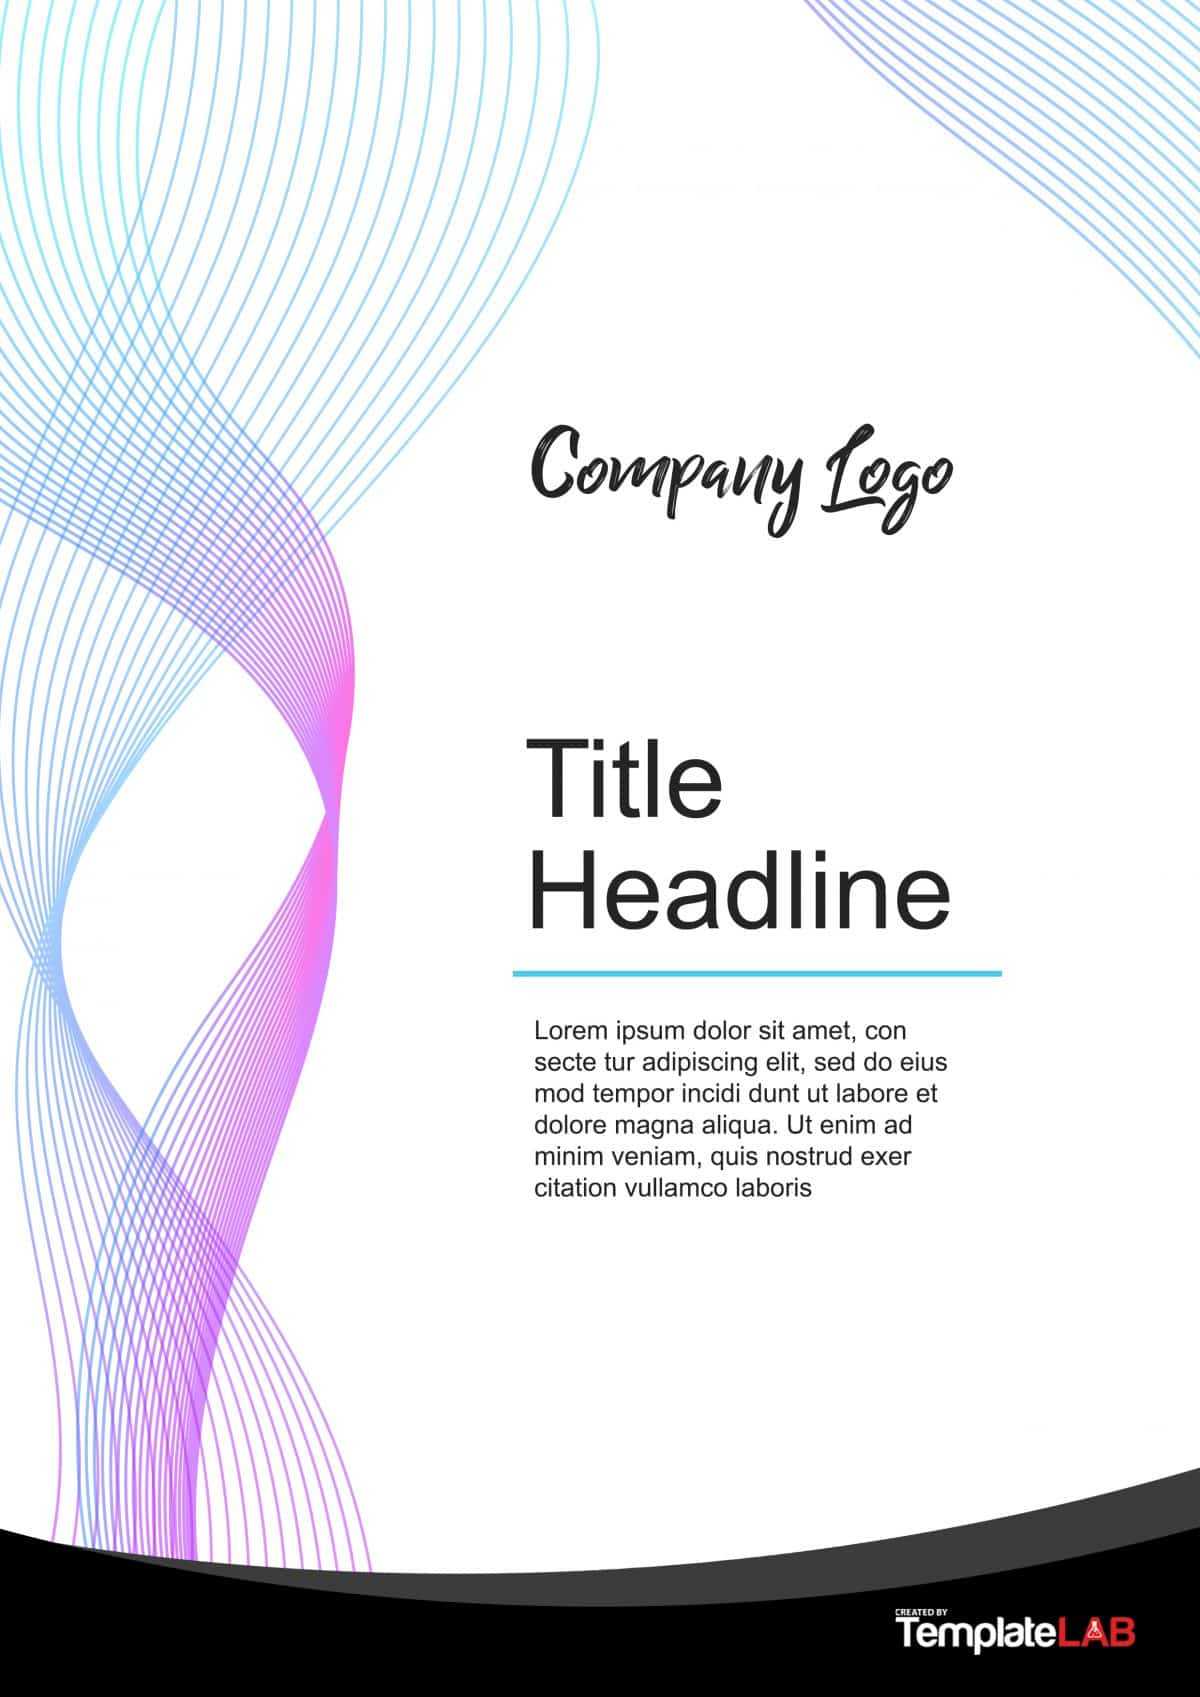 828329 Word Cover Page Templates | Wiring Resources 2019 For Cover Pages For Word Templates